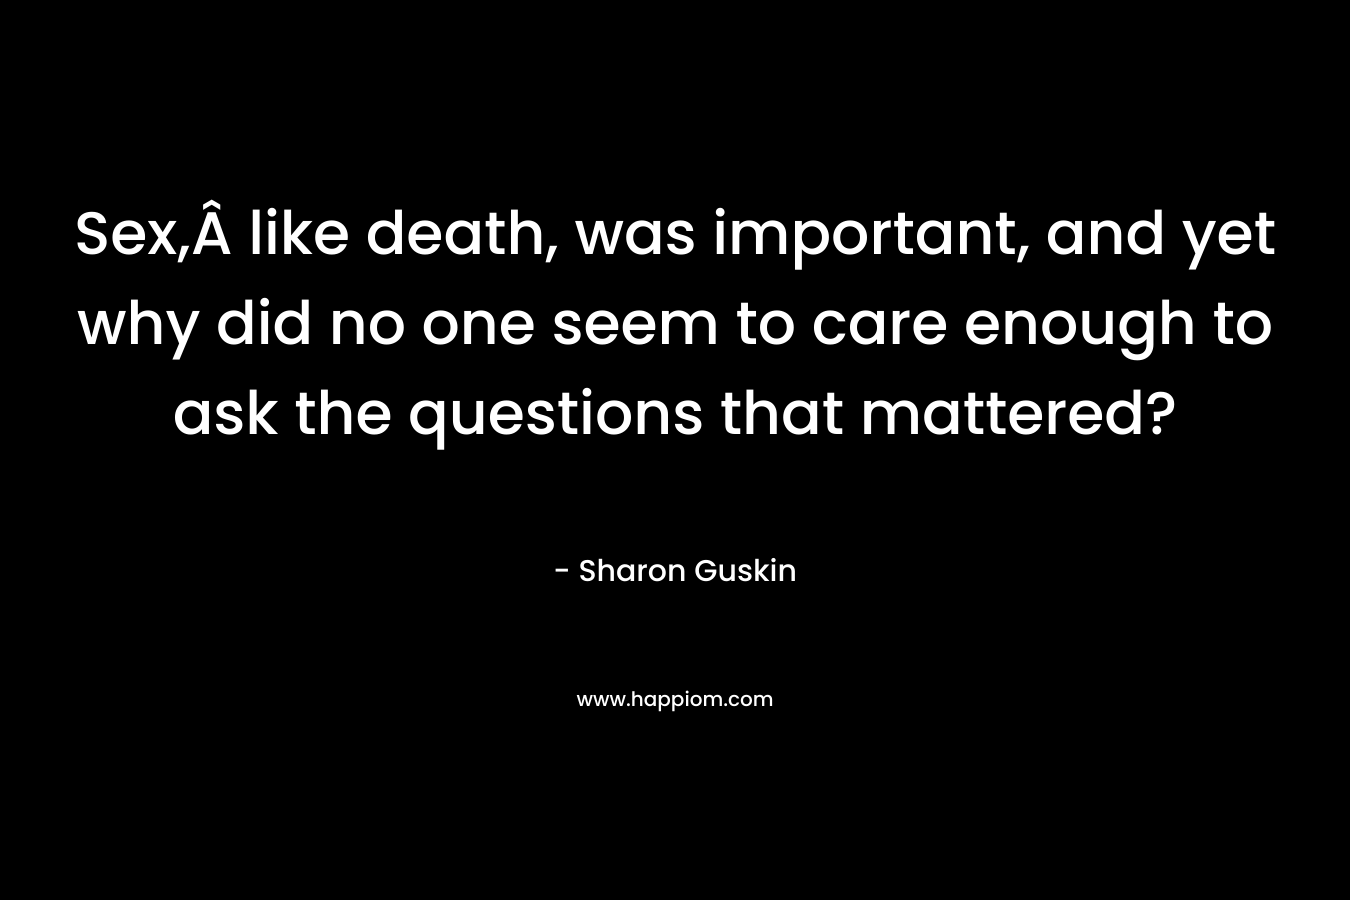 Sex,Â like death, was important, and yet why did no one seem to care enough to ask the questions that mattered? – Sharon Guskin